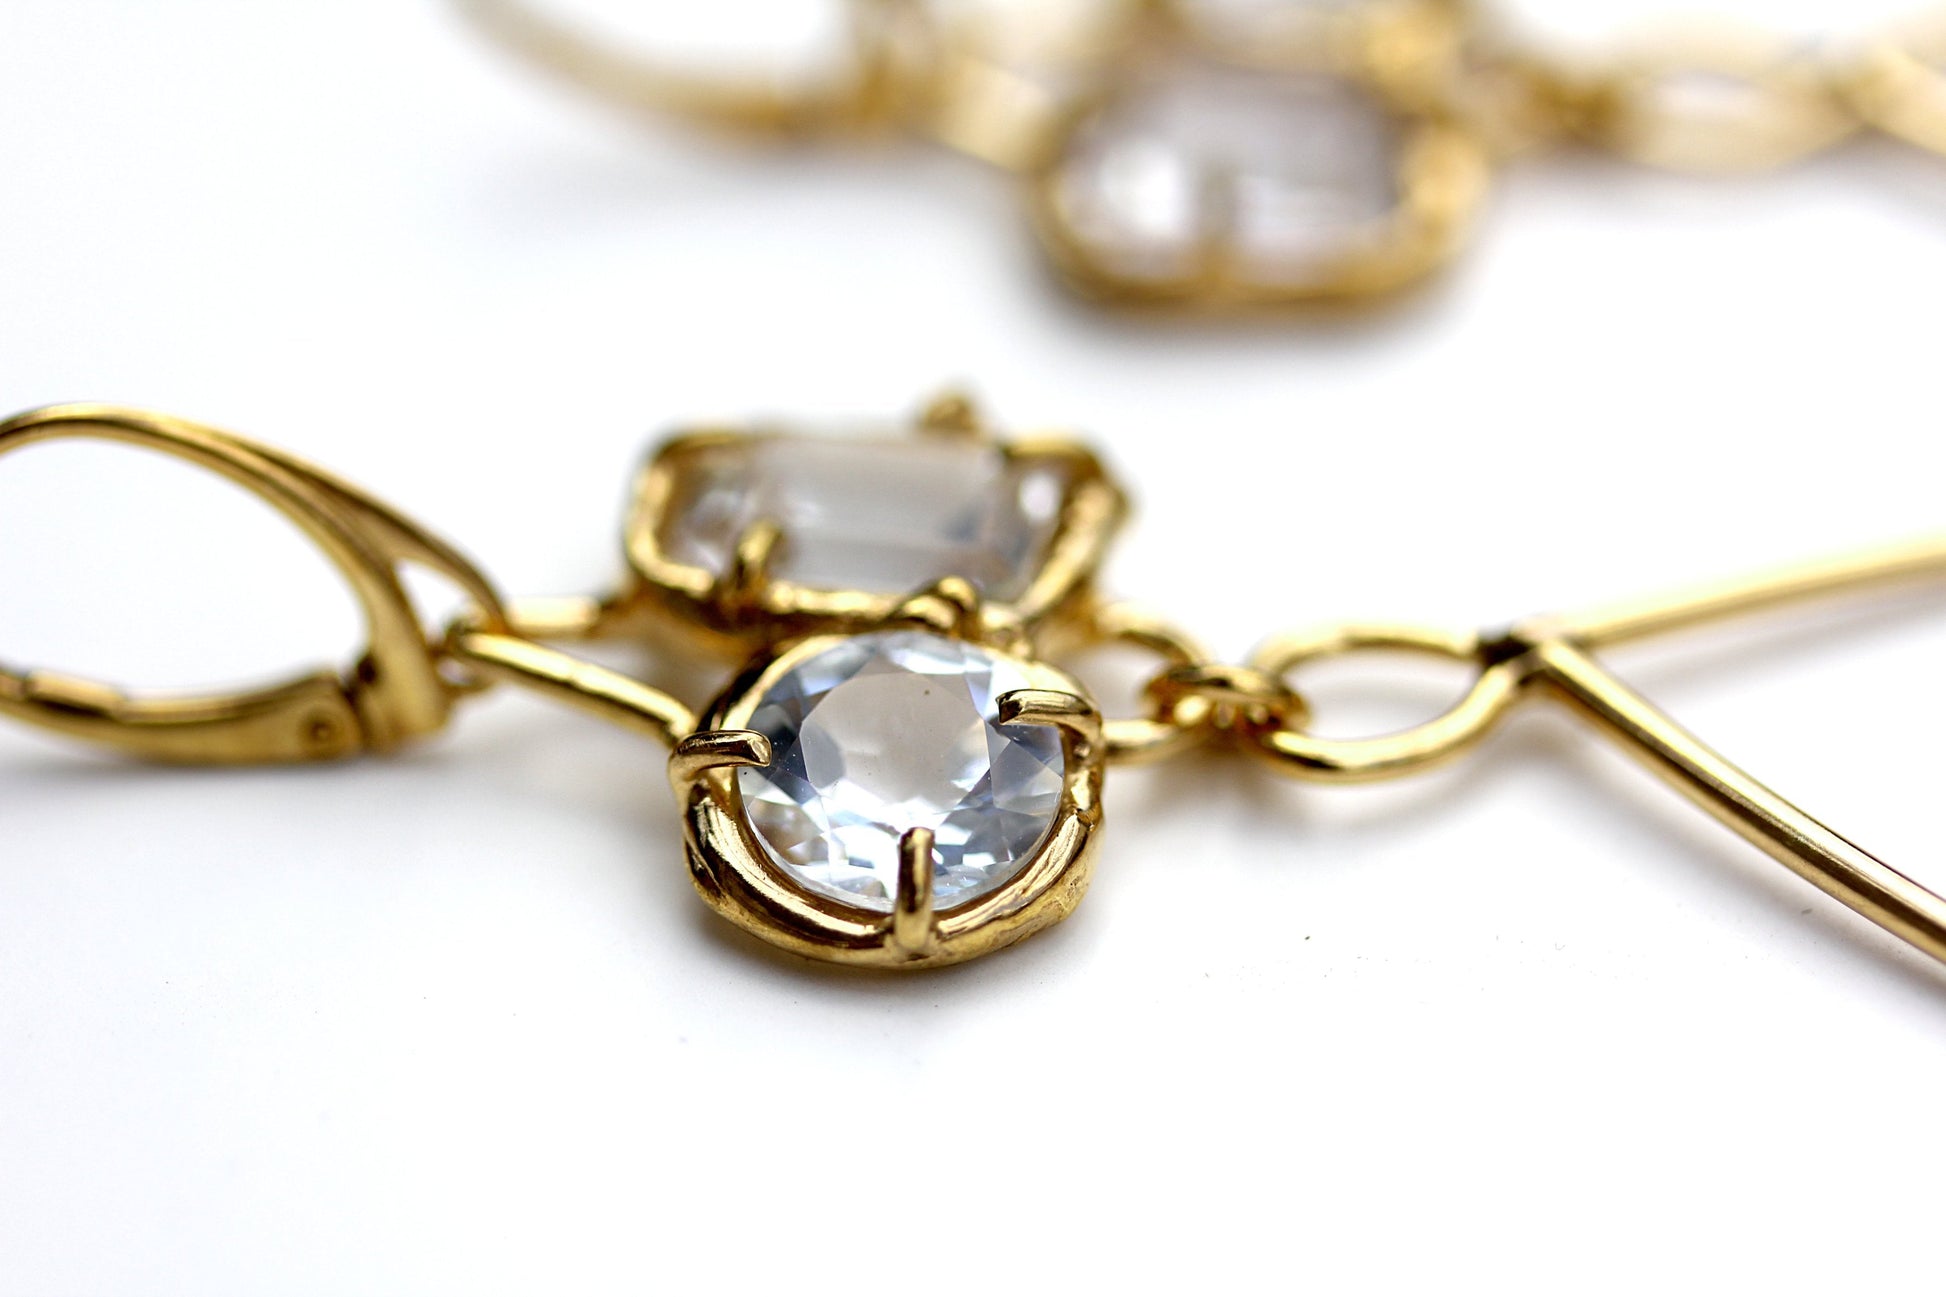 Detail photo of prong set white topaz gemstones in an organic looking earring.